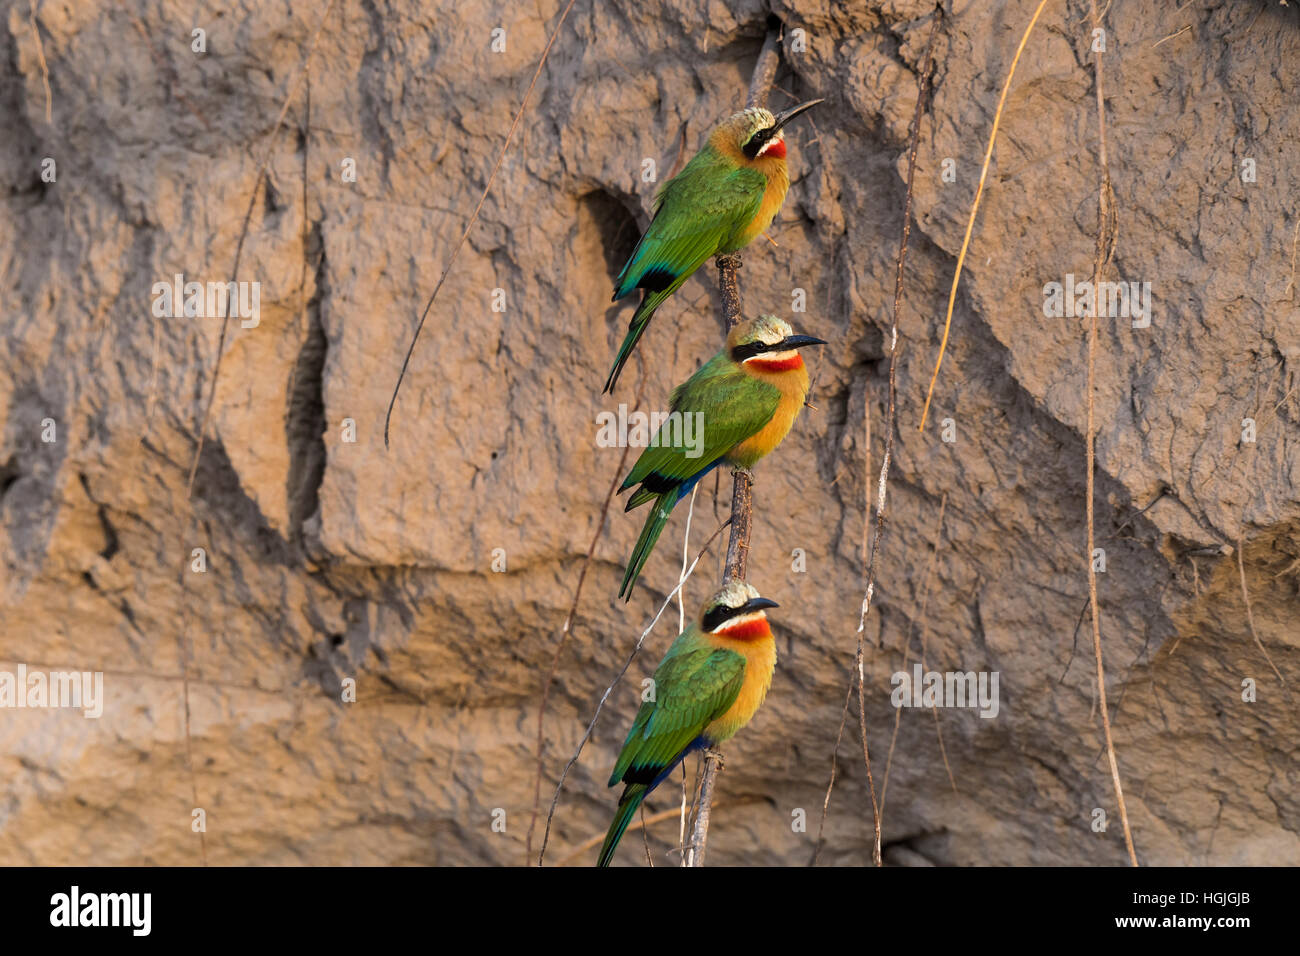 White-fronted bee-eater (Merops bullockoides) in front of nesting wall, Chobe River, Chobe National Park, Botswana Stock Photo